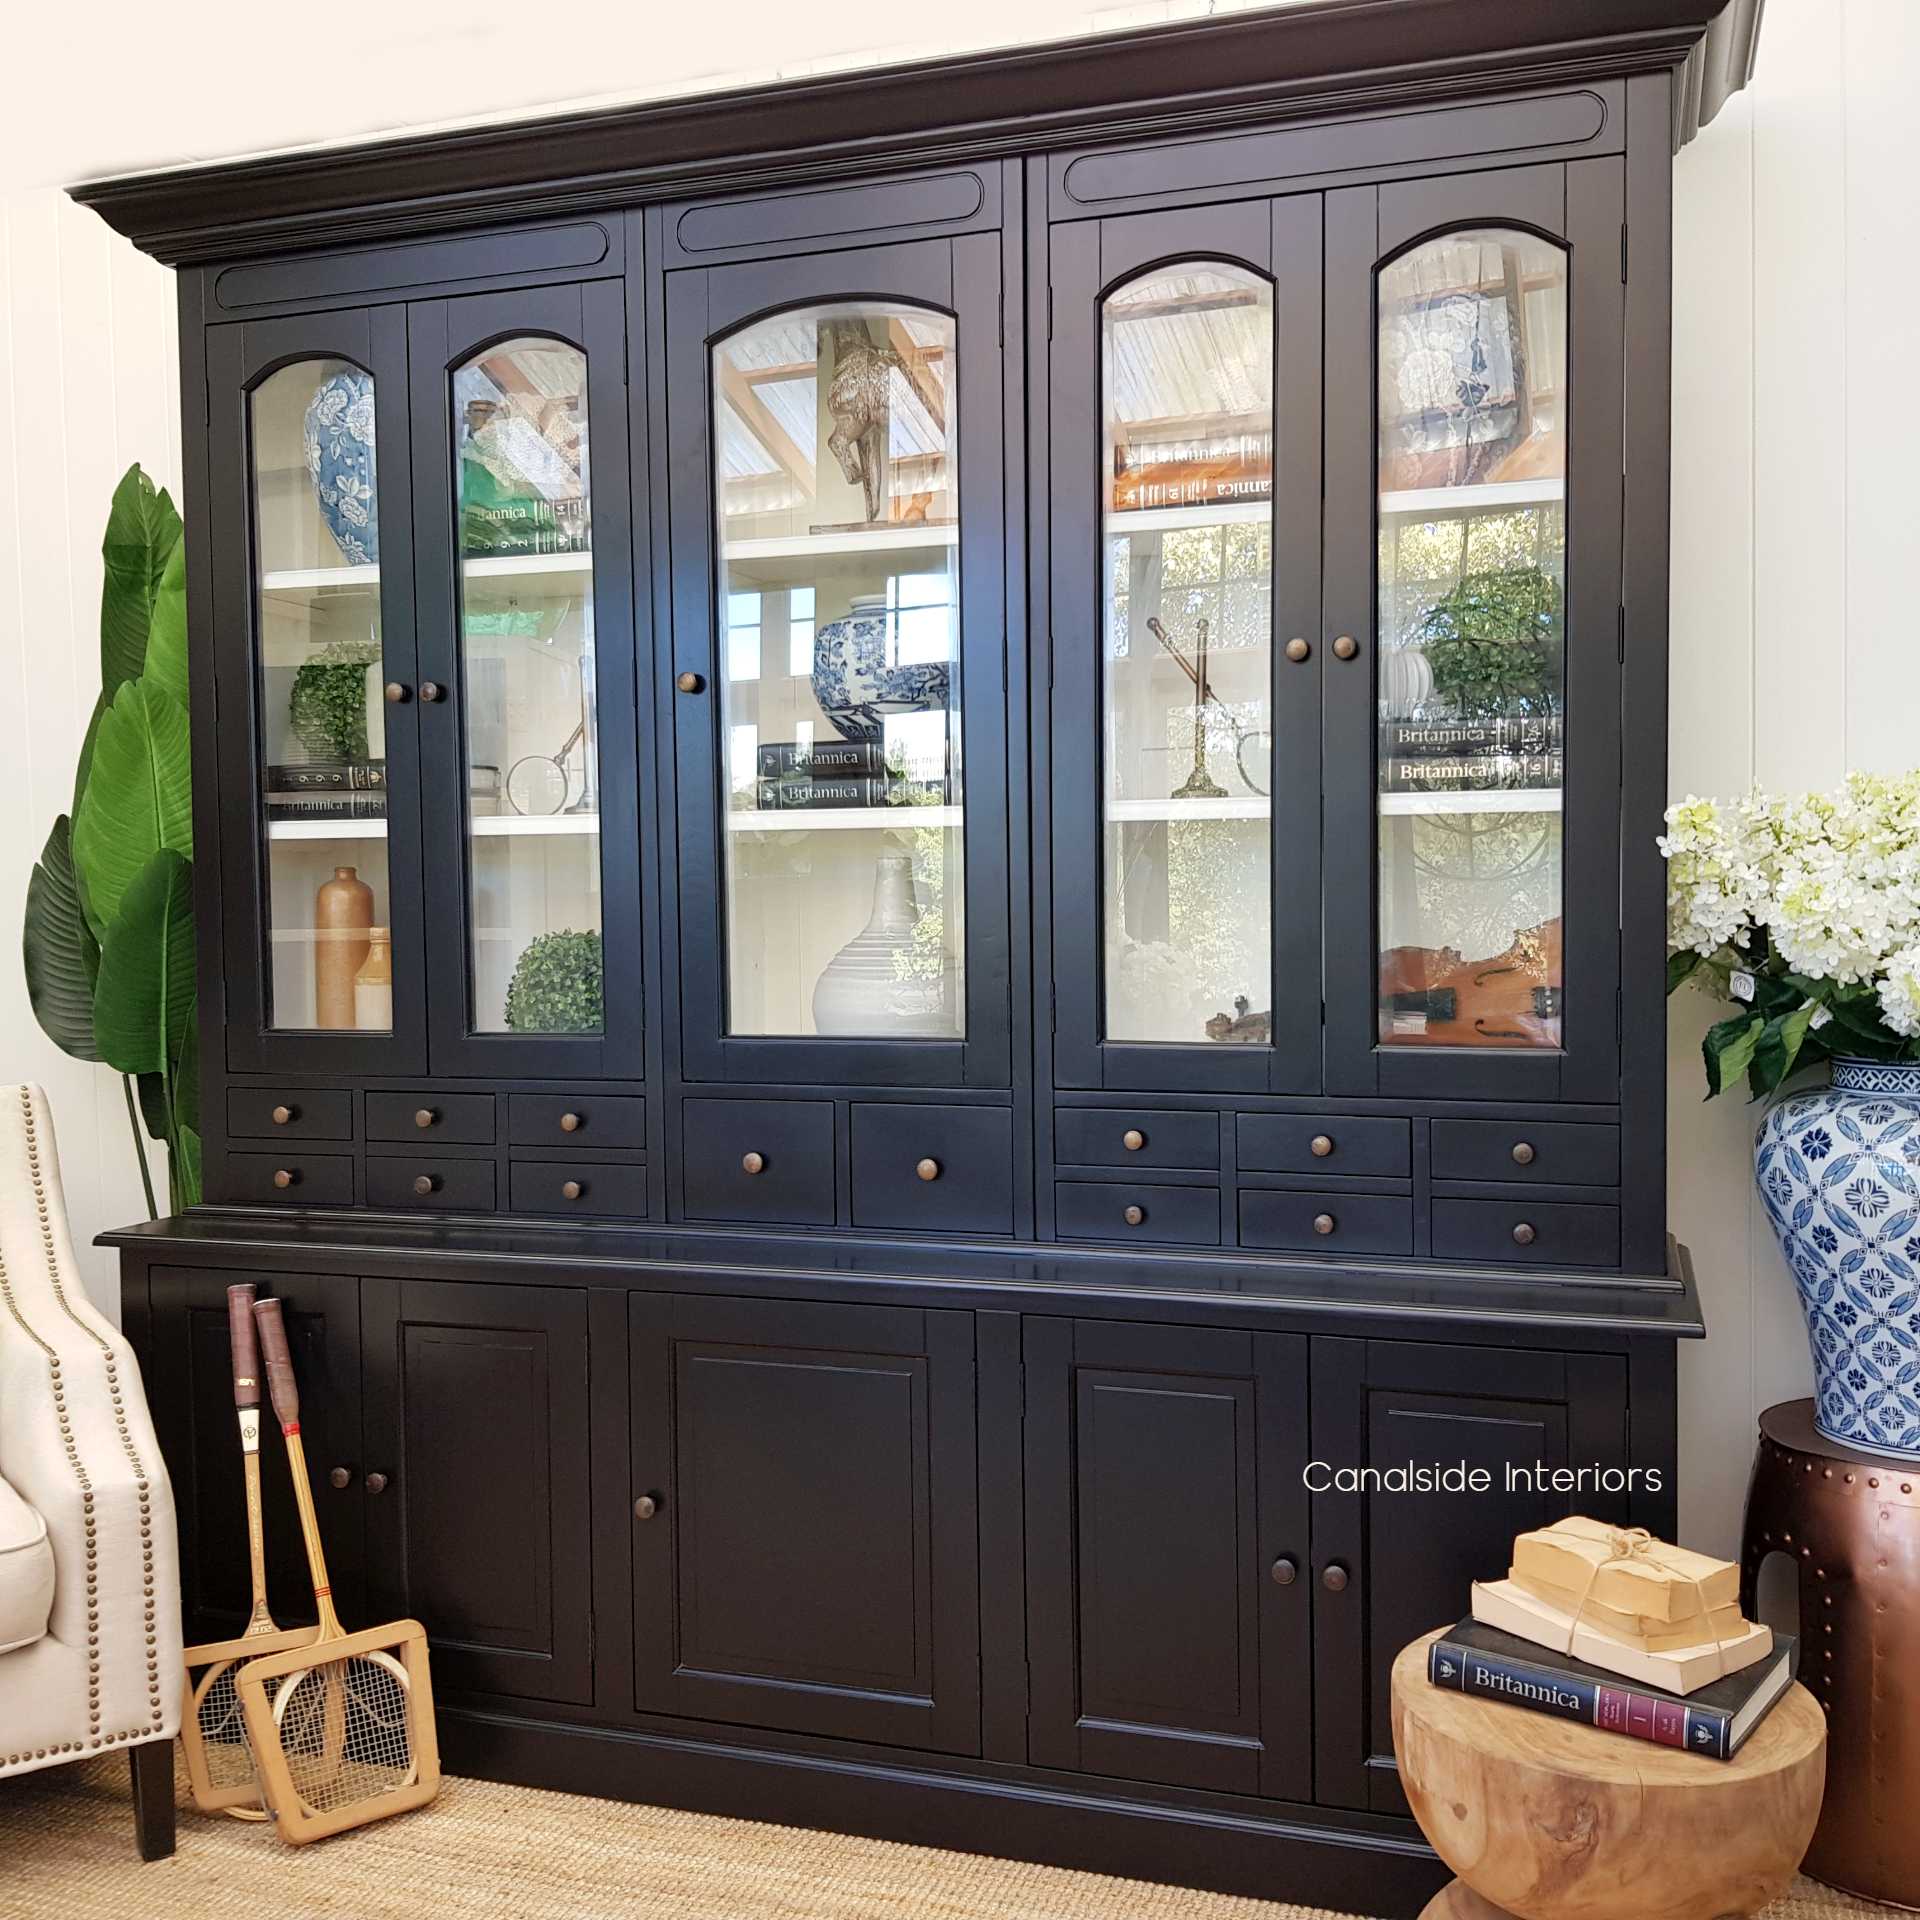 Key Largo 5 Door Display Unit Distressed Black with off white interior  HAMPTONS Style, PLANTATION Style, LIVING Cupboards & Bookcases, STORAGE, STORAGE Bookshelves & Cupboards